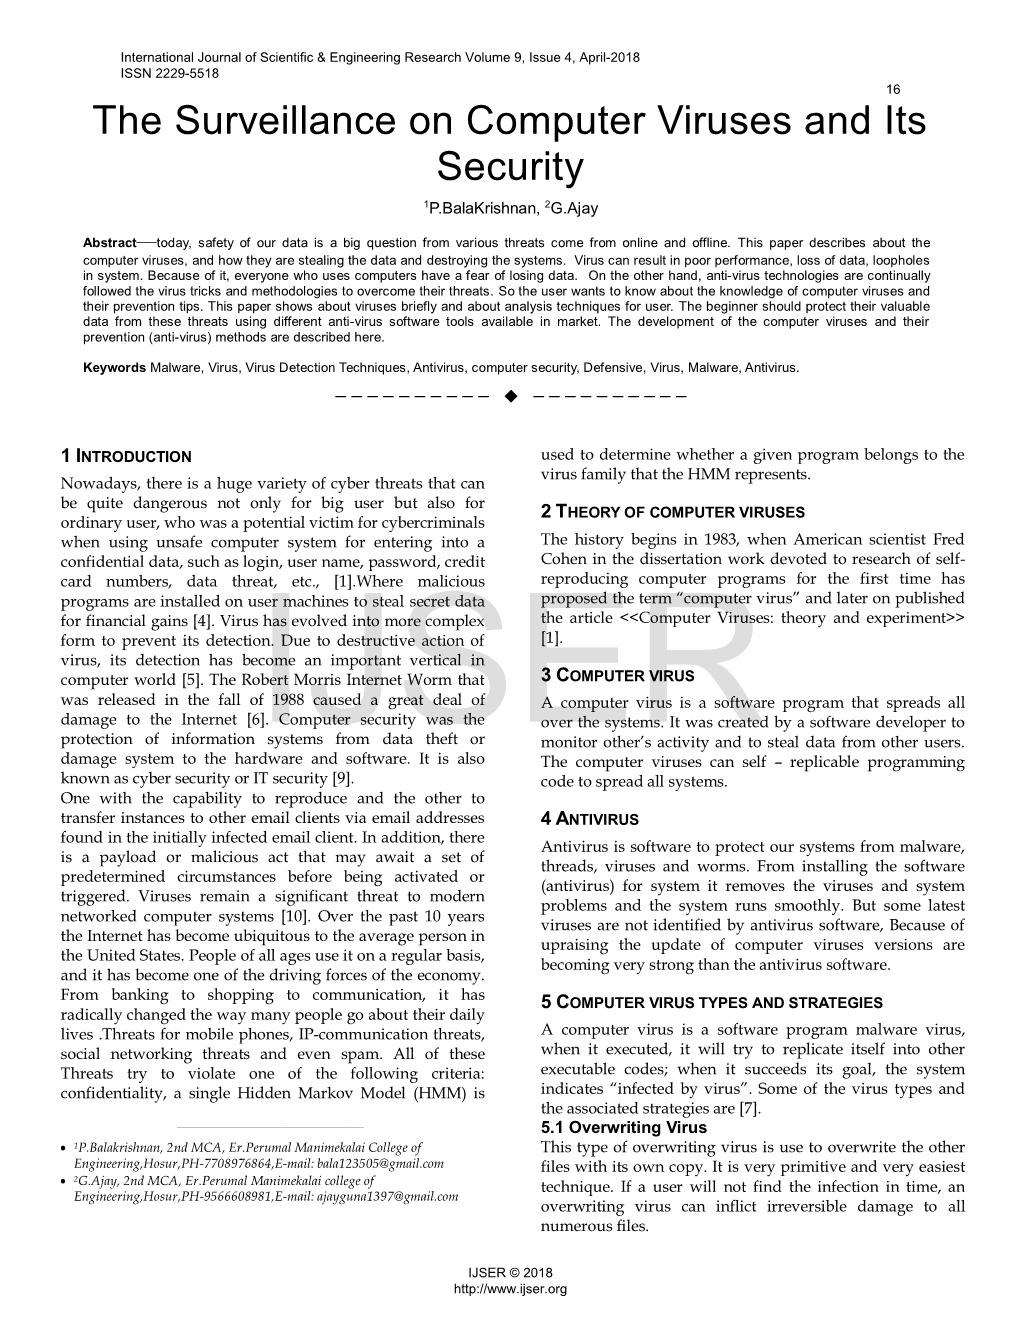 The Surveillance on Computer Viruses and Its Security 1P.Balakrishnan, 2G.Ajay